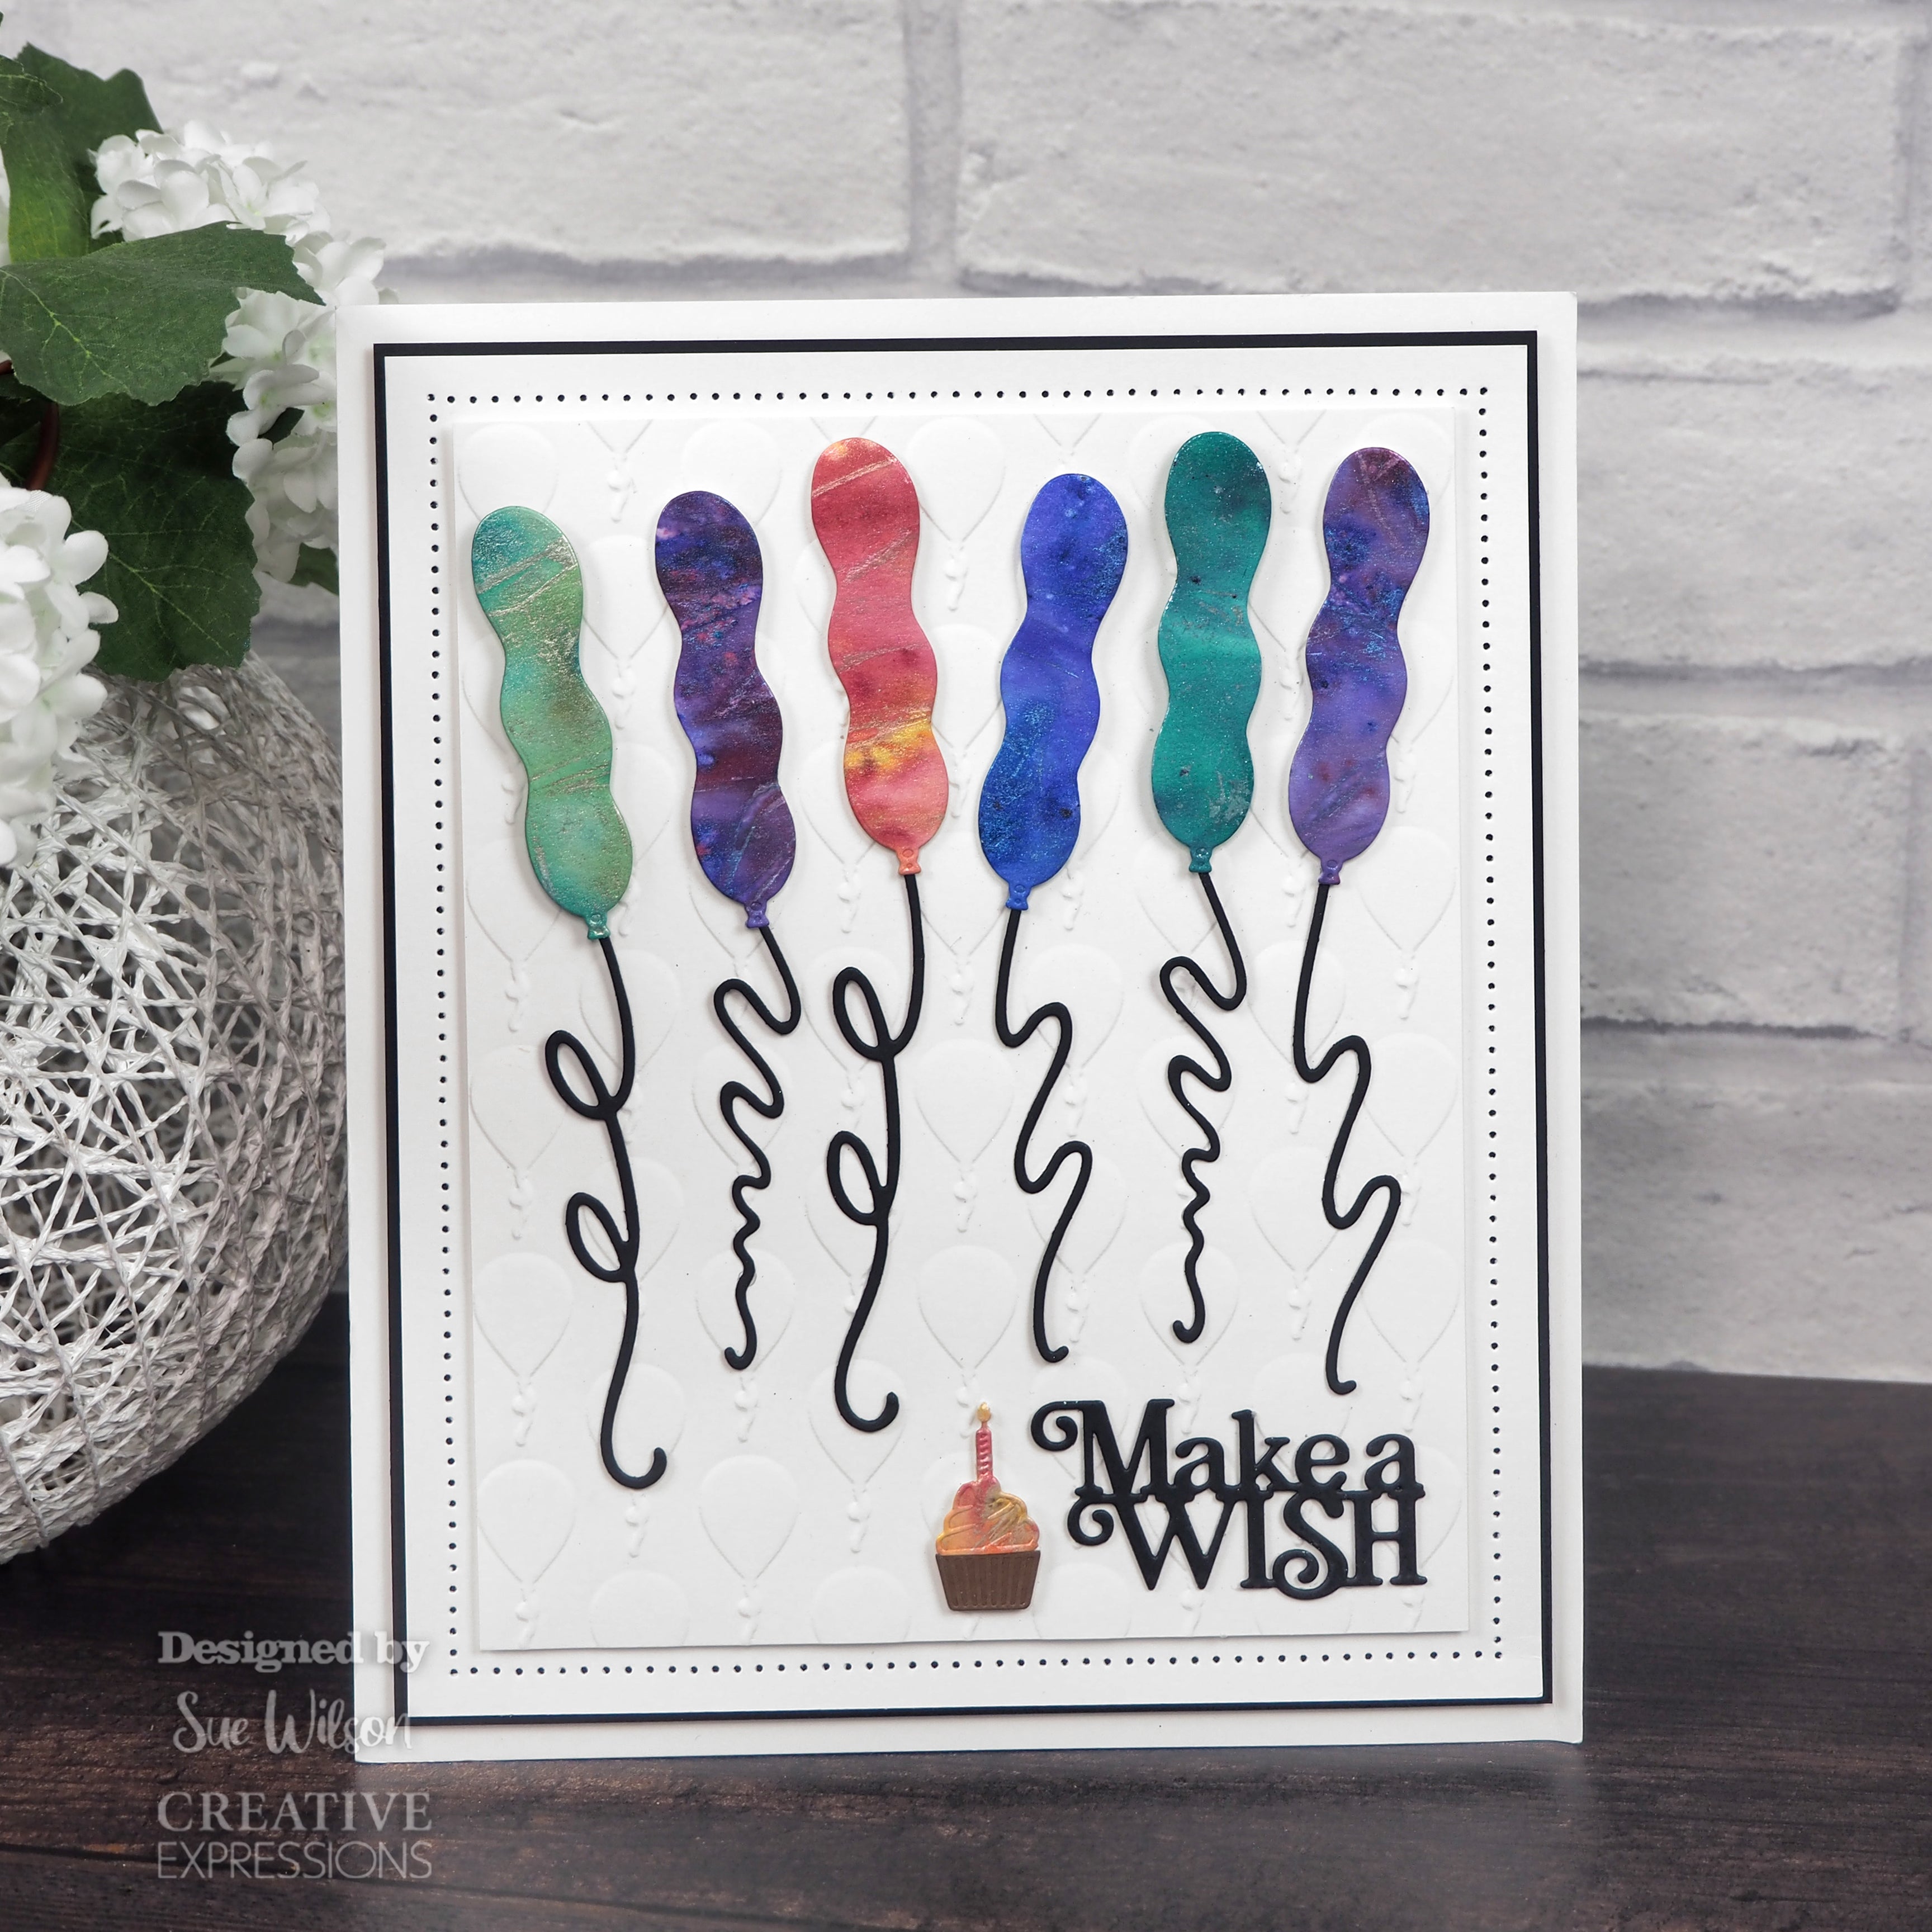 Creative Expressions Sue Wilson Mini Expressions Happy Birthday Candle Craft Die